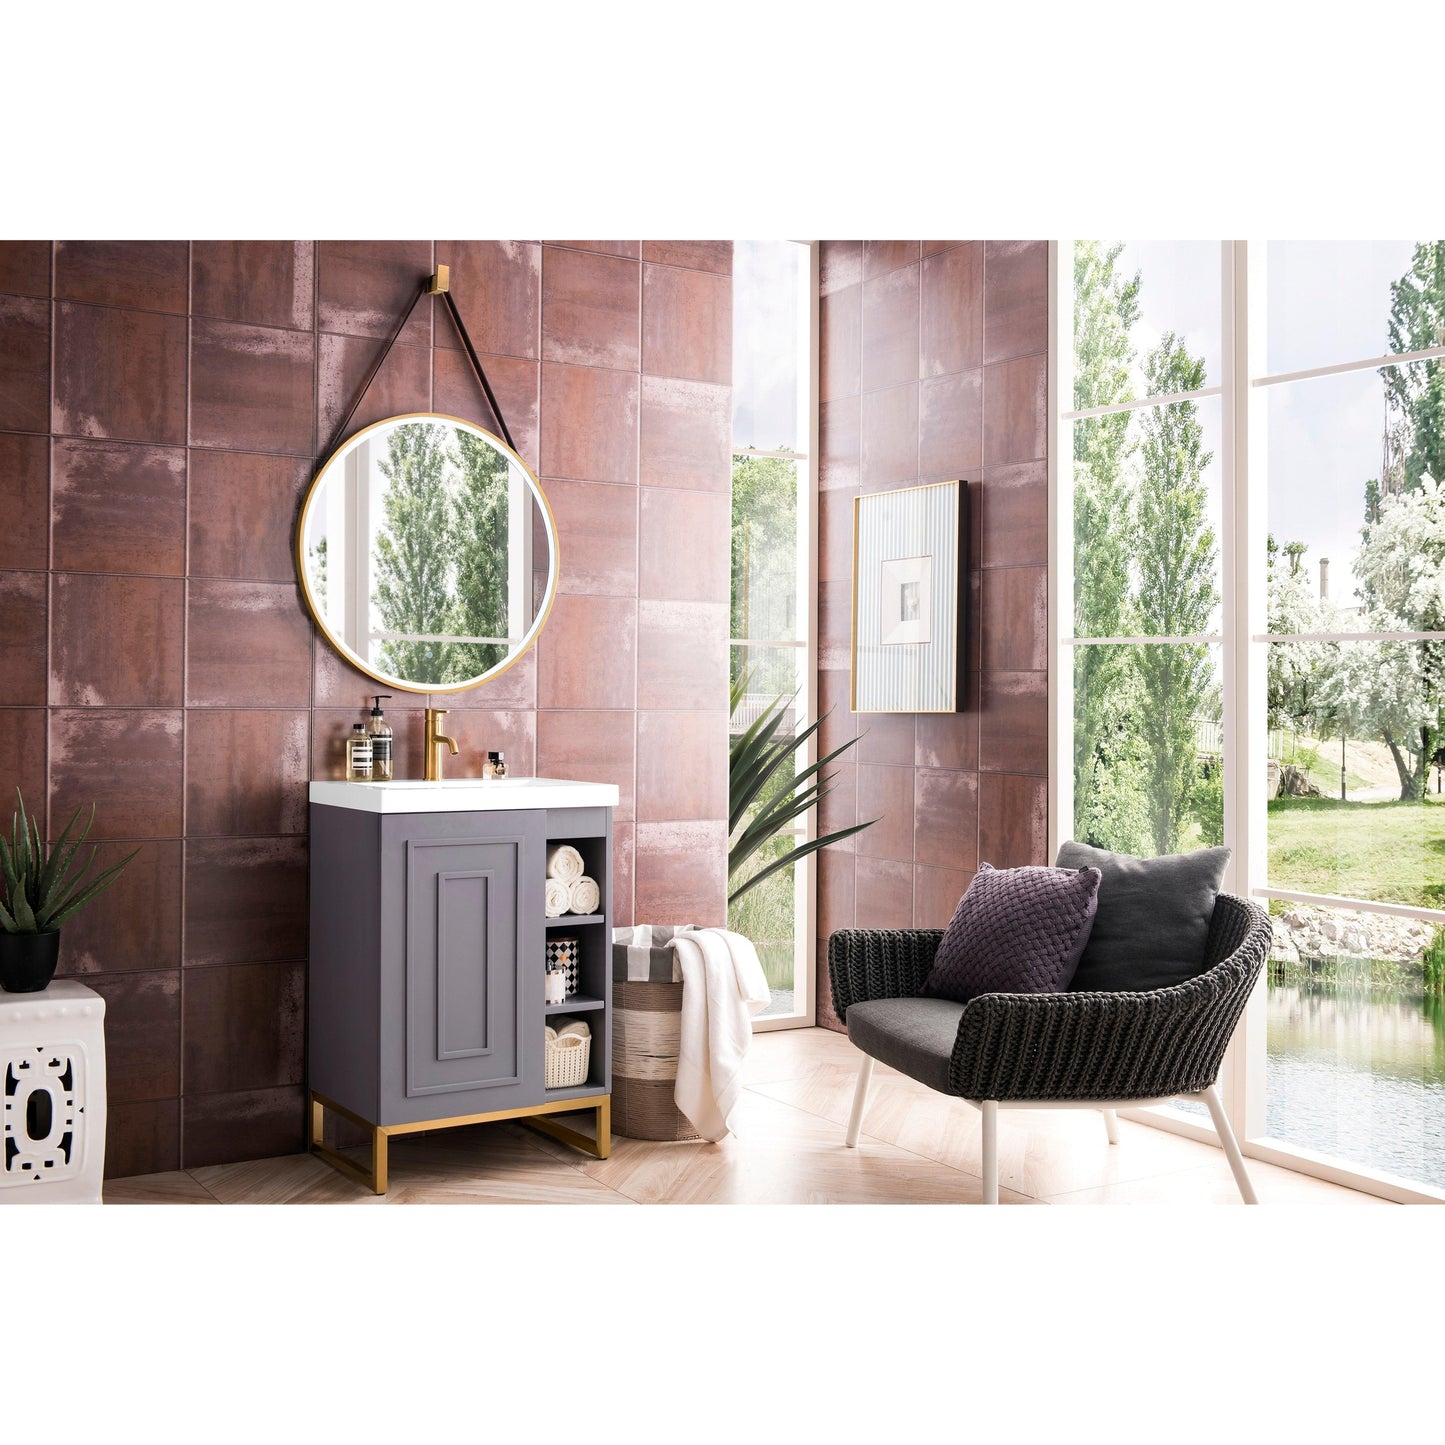 James Martin Vanities Alicante 24" Grey Smoke, Radiant Gold Single Vanity Cabinet With White Glossy Composite Countertop